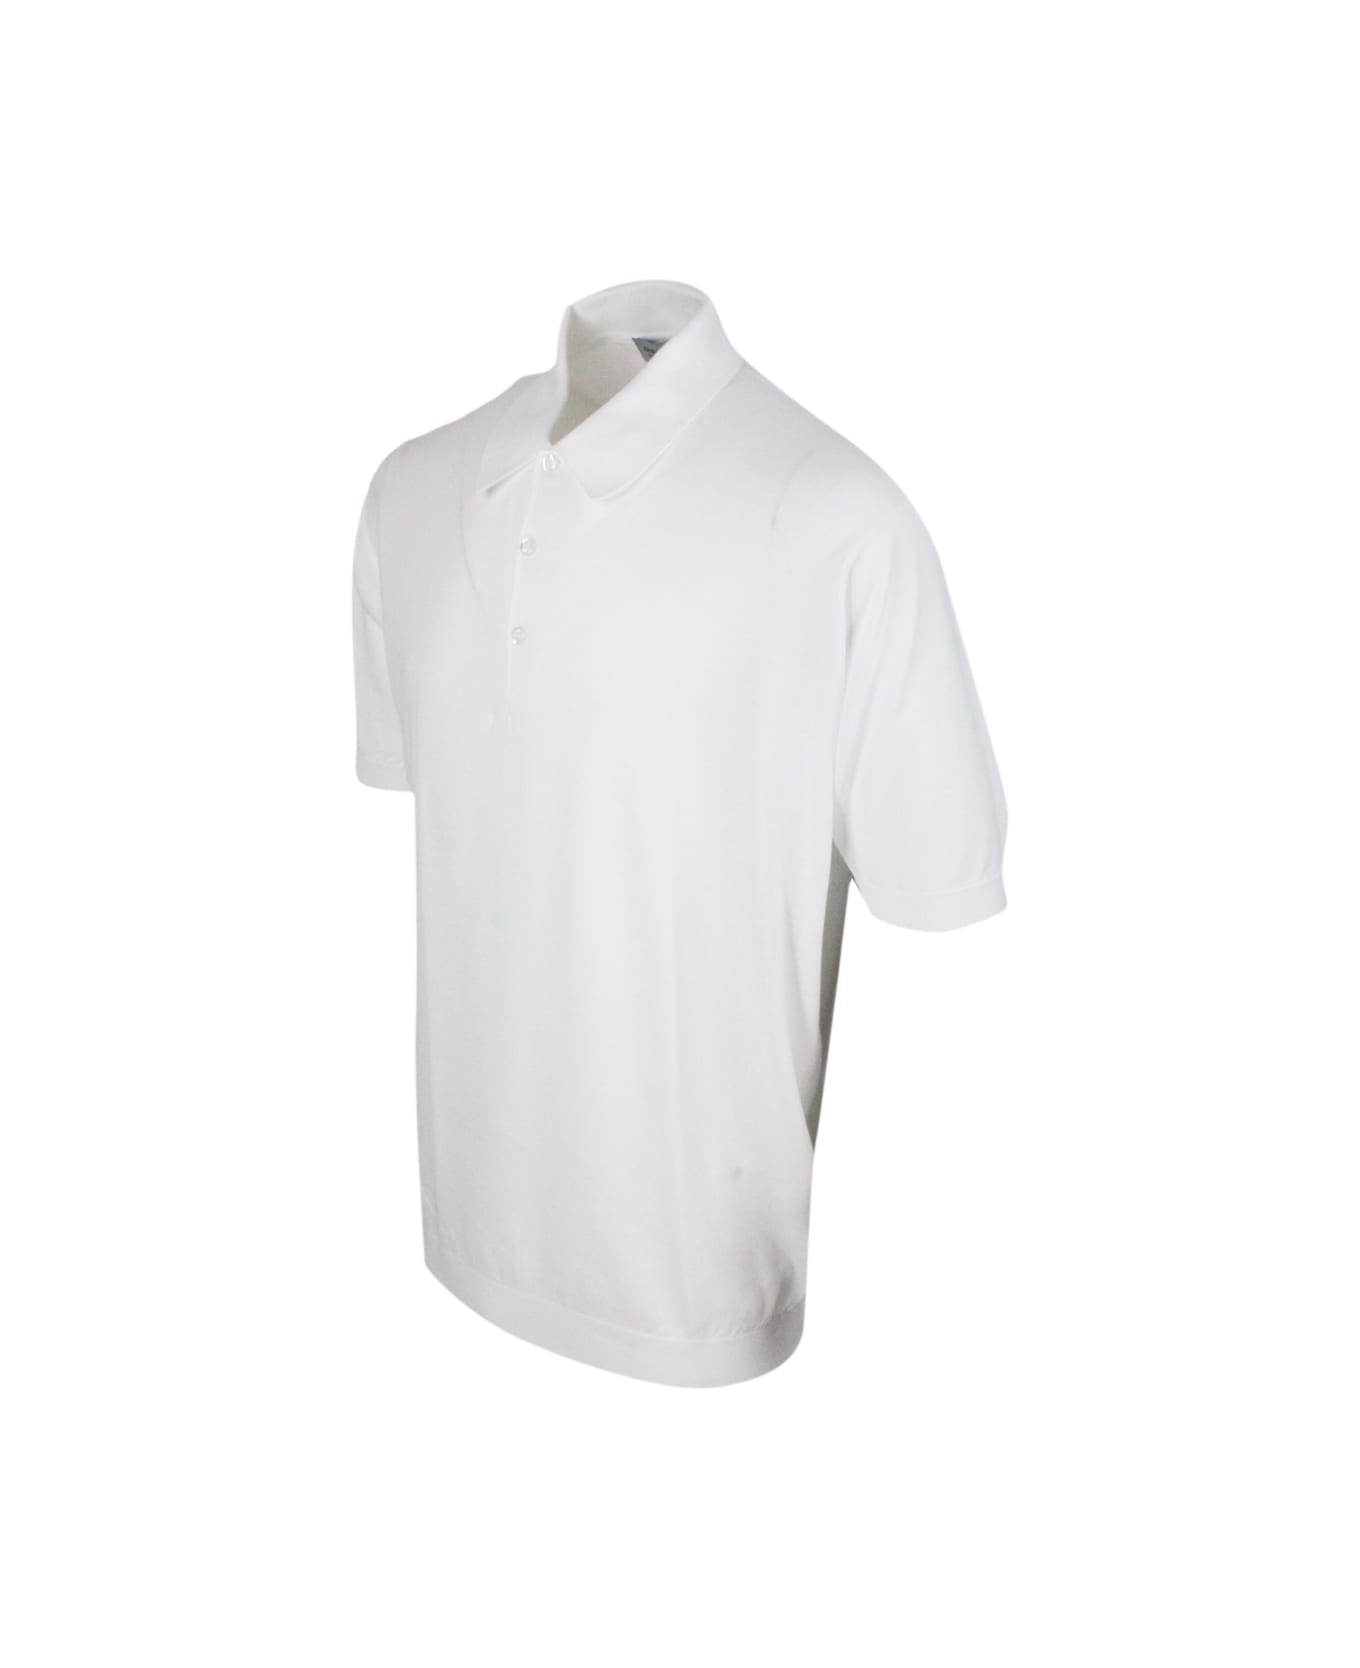 John Smedley Short-sleeved Polo Shirt In Extra-fine Cotton Thread With Three Buttons - White ポロシャツ